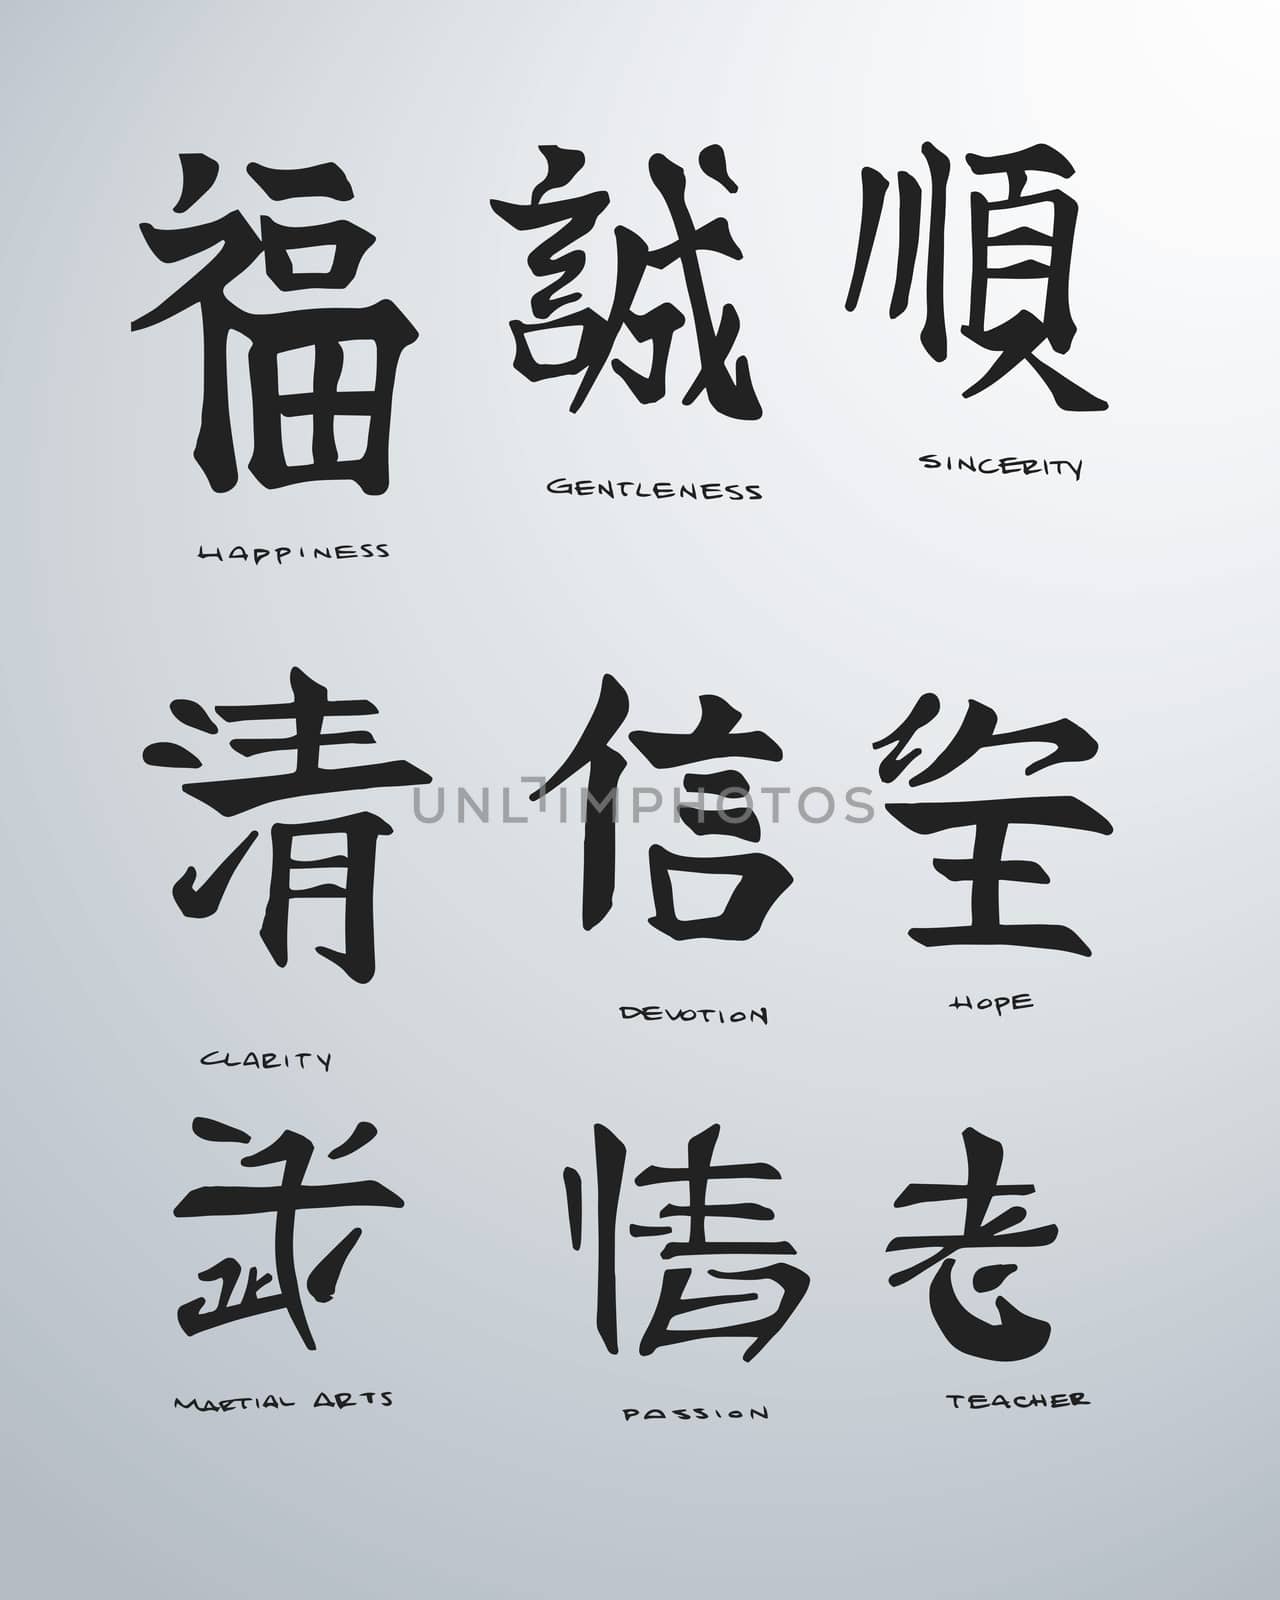 Hand drawn vector illustration or drawing of different japanese symbols